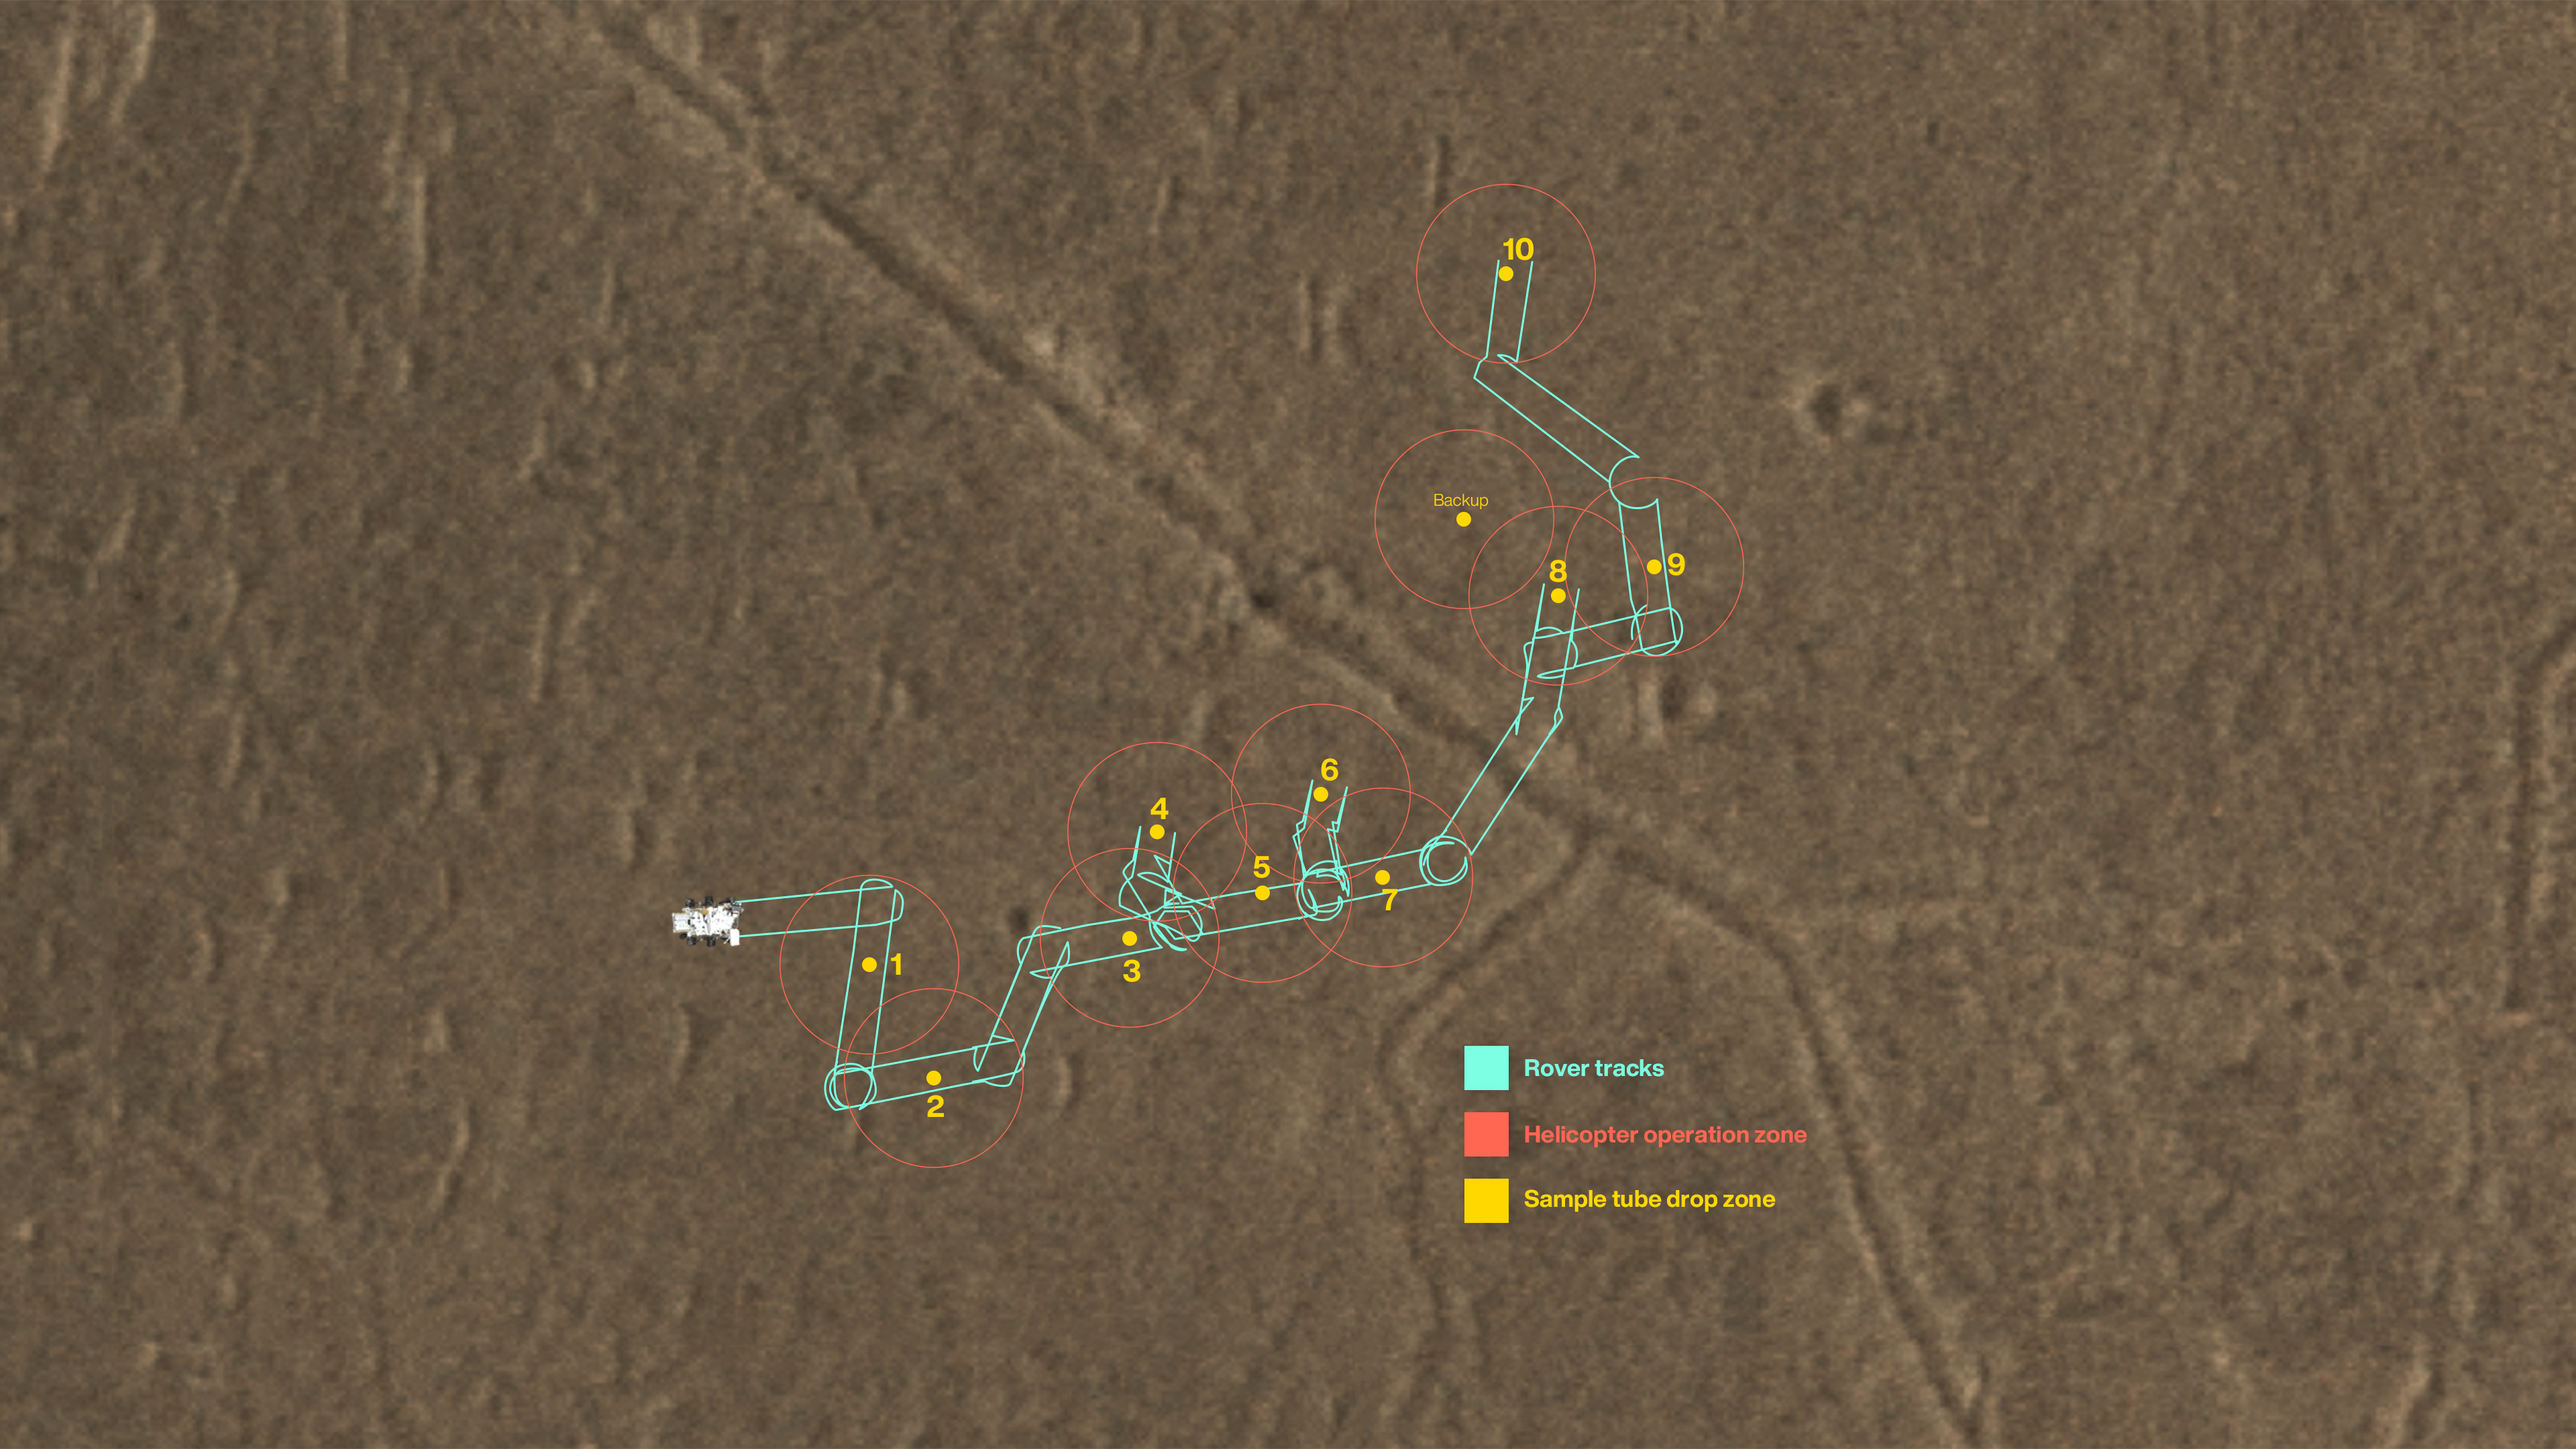 This map shows where NASA's Perseverance Mars rover will drop off 10 samples that a future mission could pick up.  The orange circles represent areas where a sample recovery helicopter can safely operate to retrieve the sample tubes.